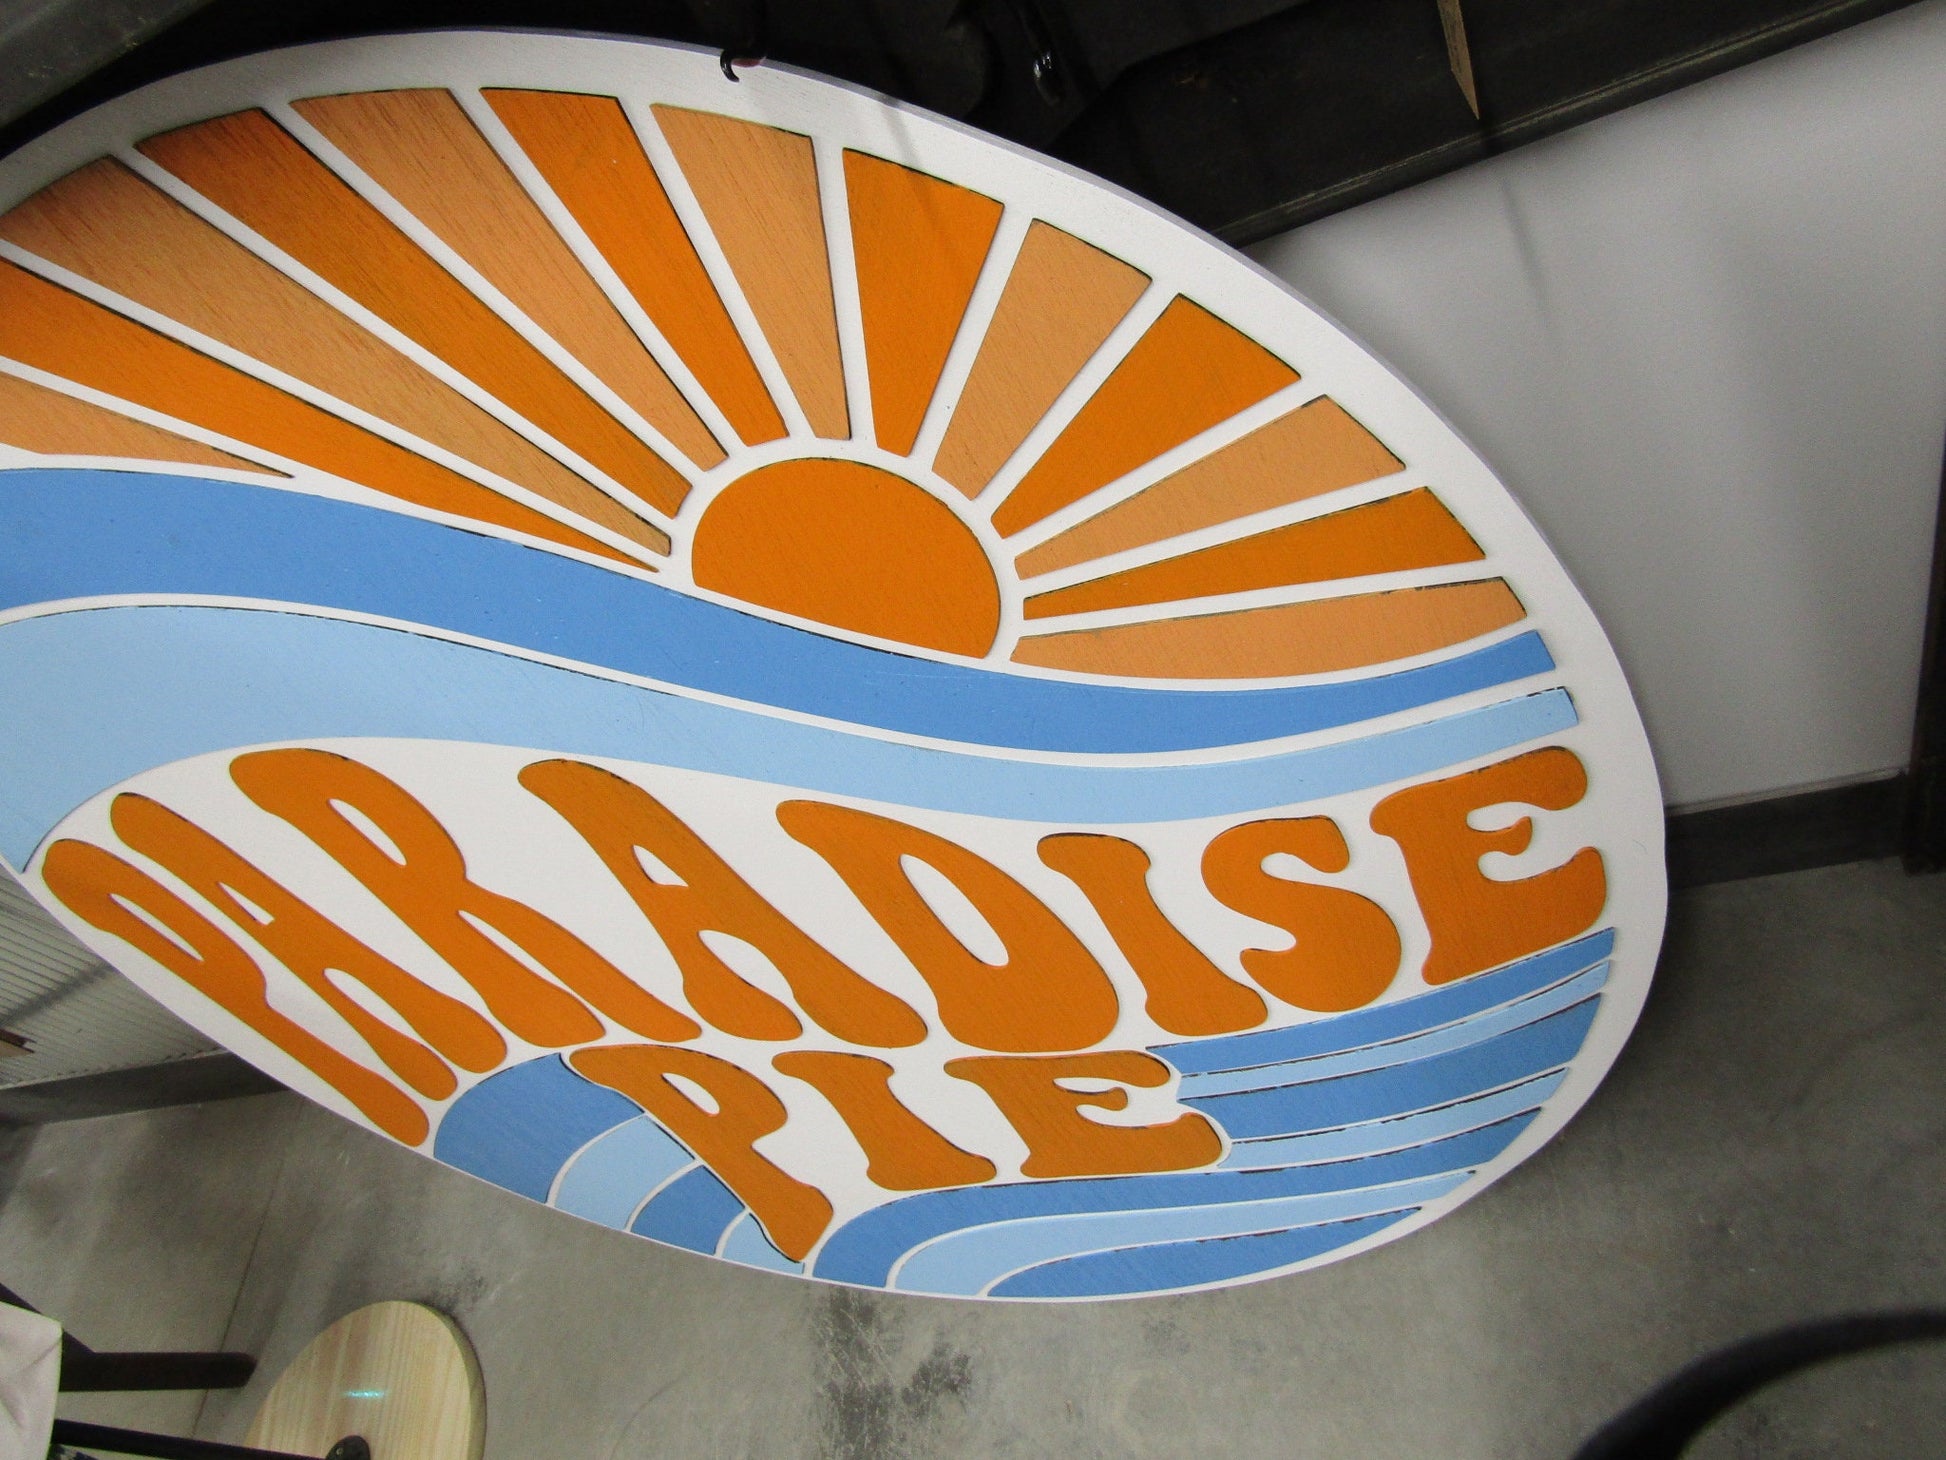 Custom XL Small Business Sign Commerical Signage Paradise Pie Sunset Water 3D Raised Text Handmade Store Front Made to Order Baker Treats